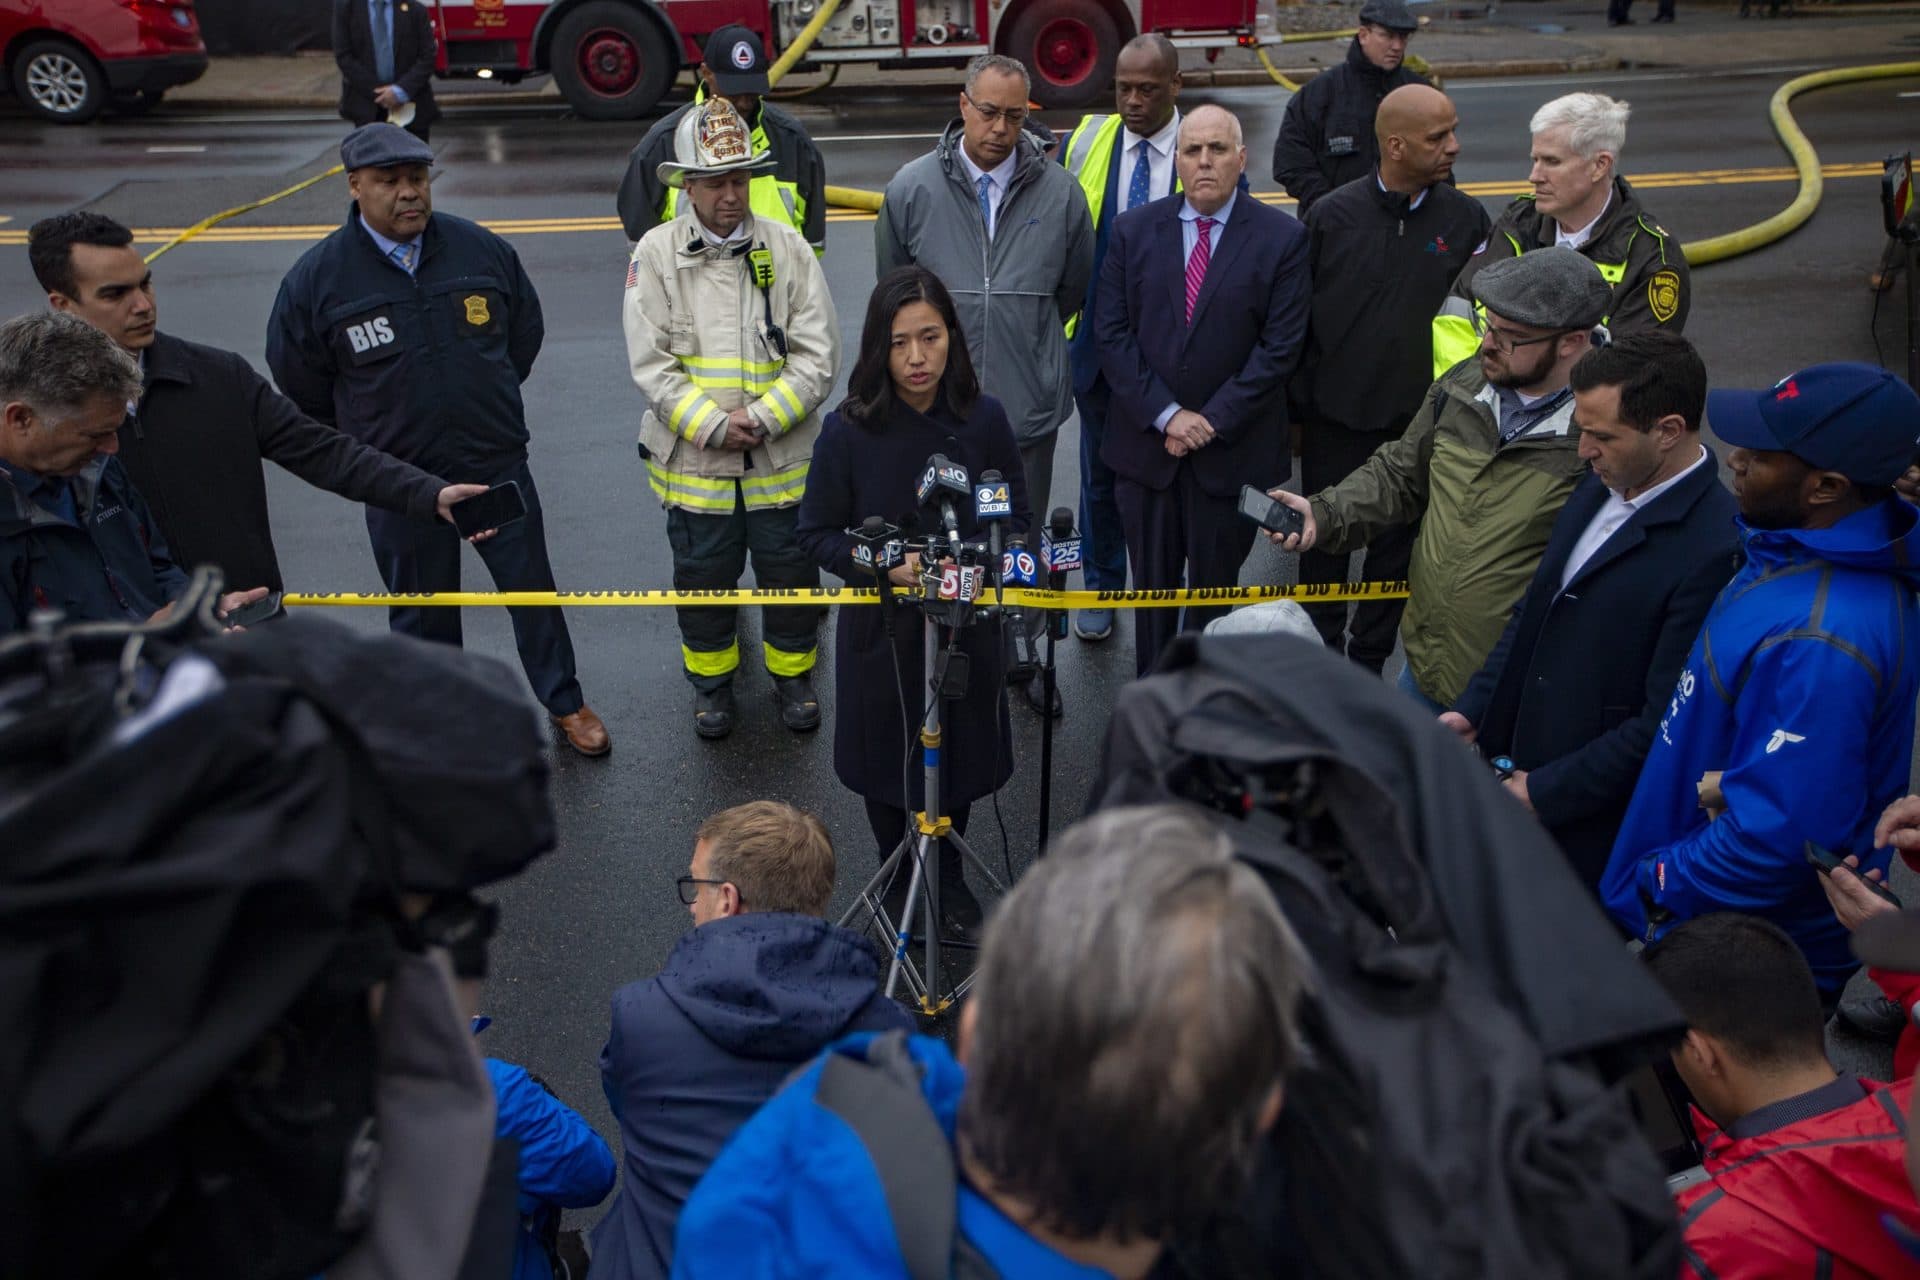 Mayor Michelle Wu speaks with the press after touring the scene of the accident at the old Edison Building in South Boston. (Jesse Costa/WBUR)